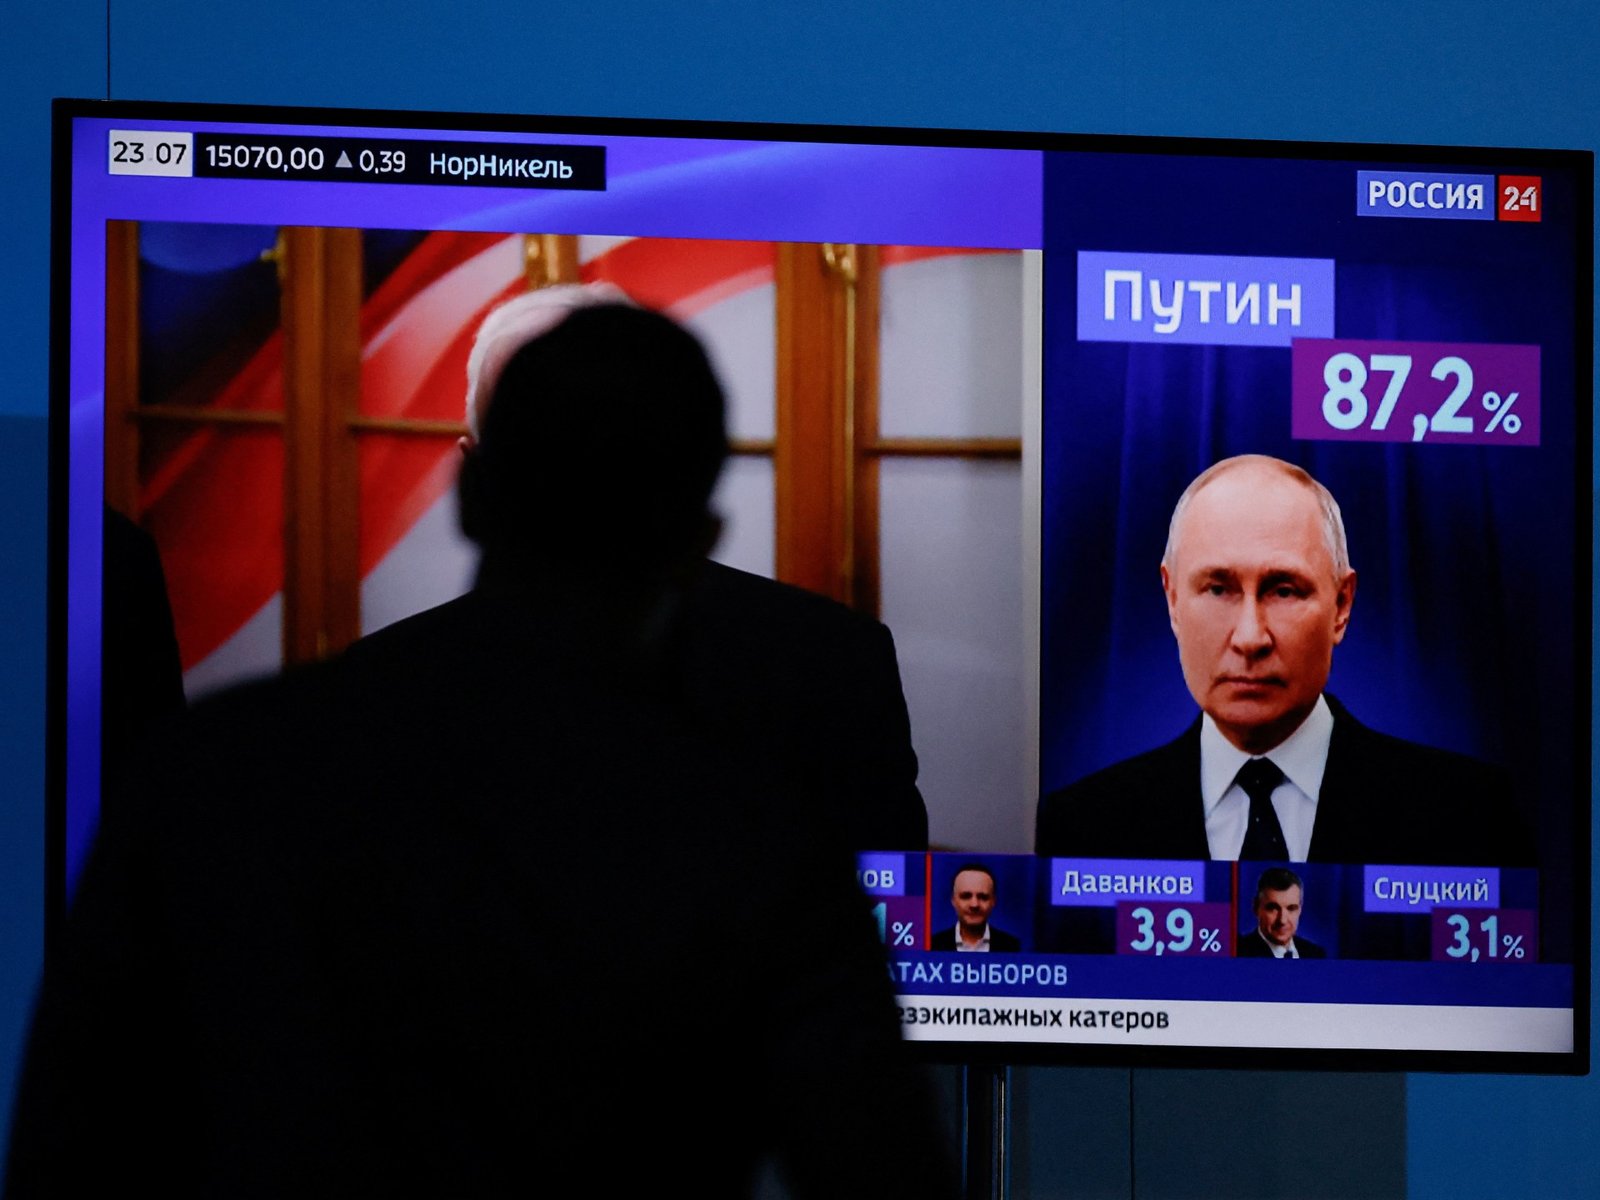 Russia’s Putin hails victory in election criticised for lacking legitimacy | Vladimir Putin News